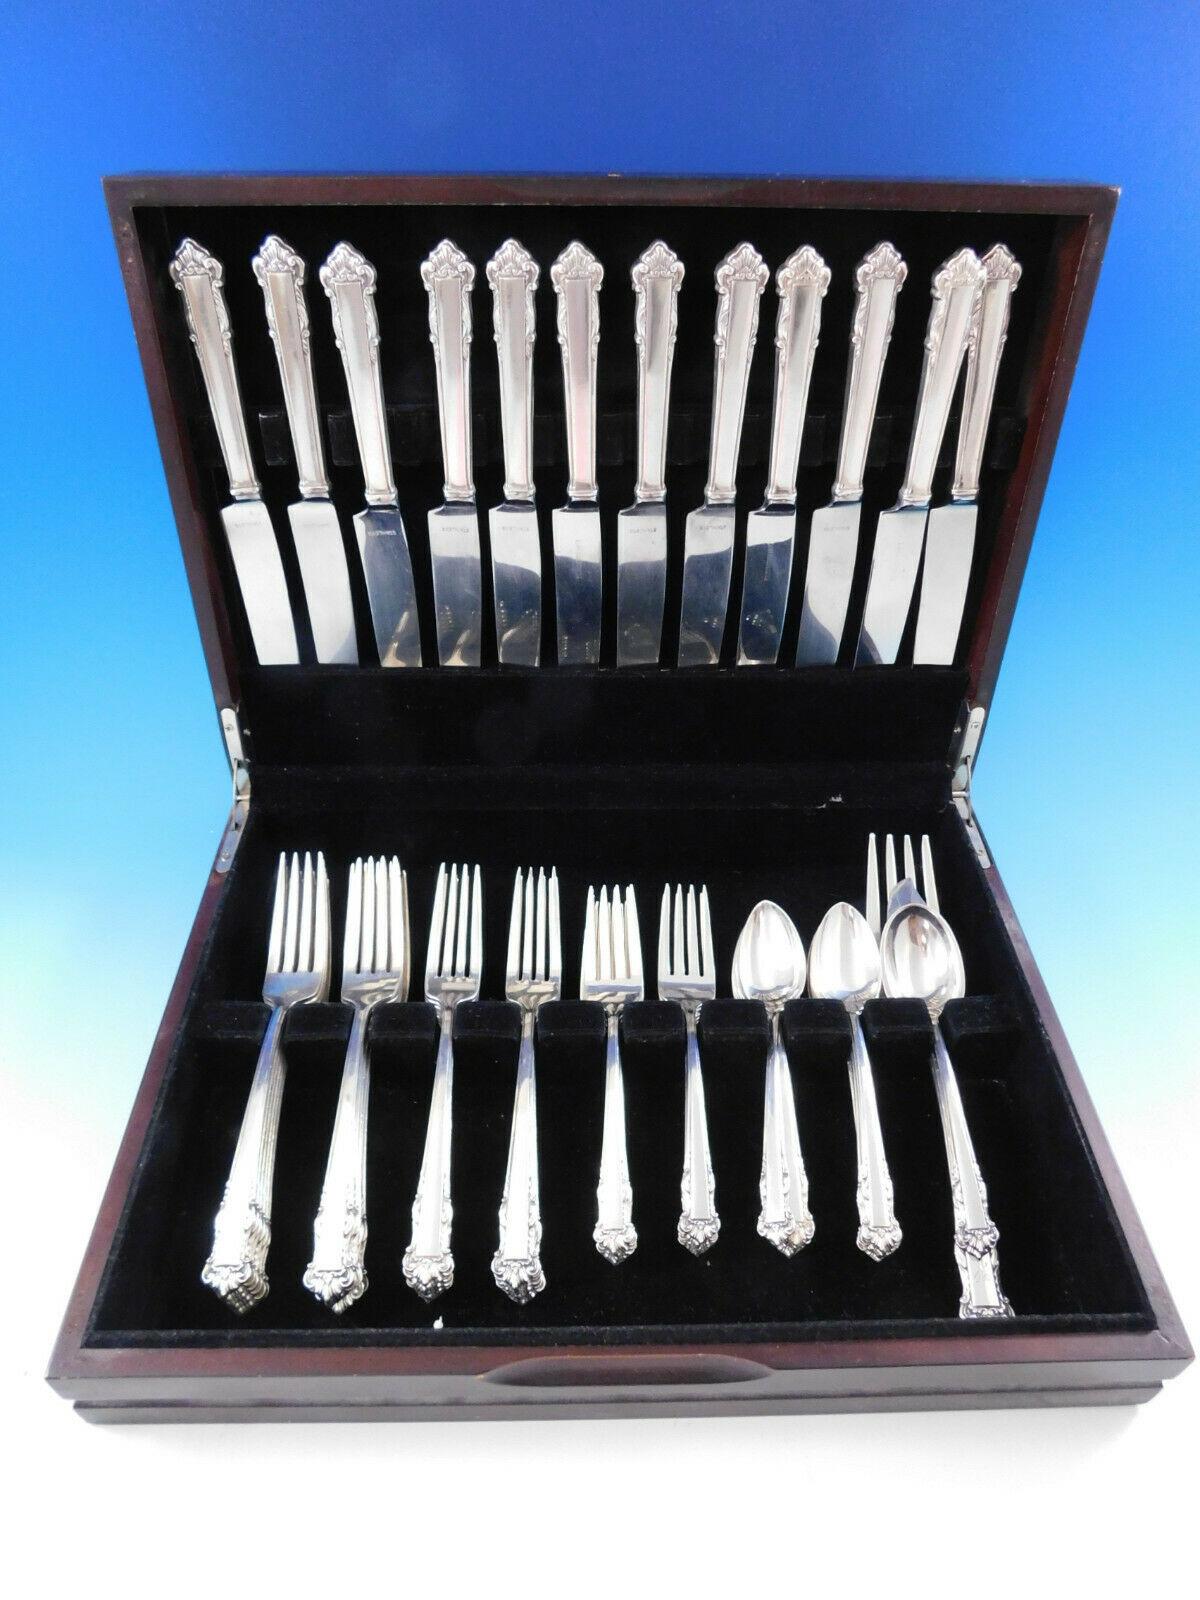 Dinner size English shell by Lunt sterling silver flatware set, 63 pieces. This set includes:

Condition12 dinner size knives, 9 1/2